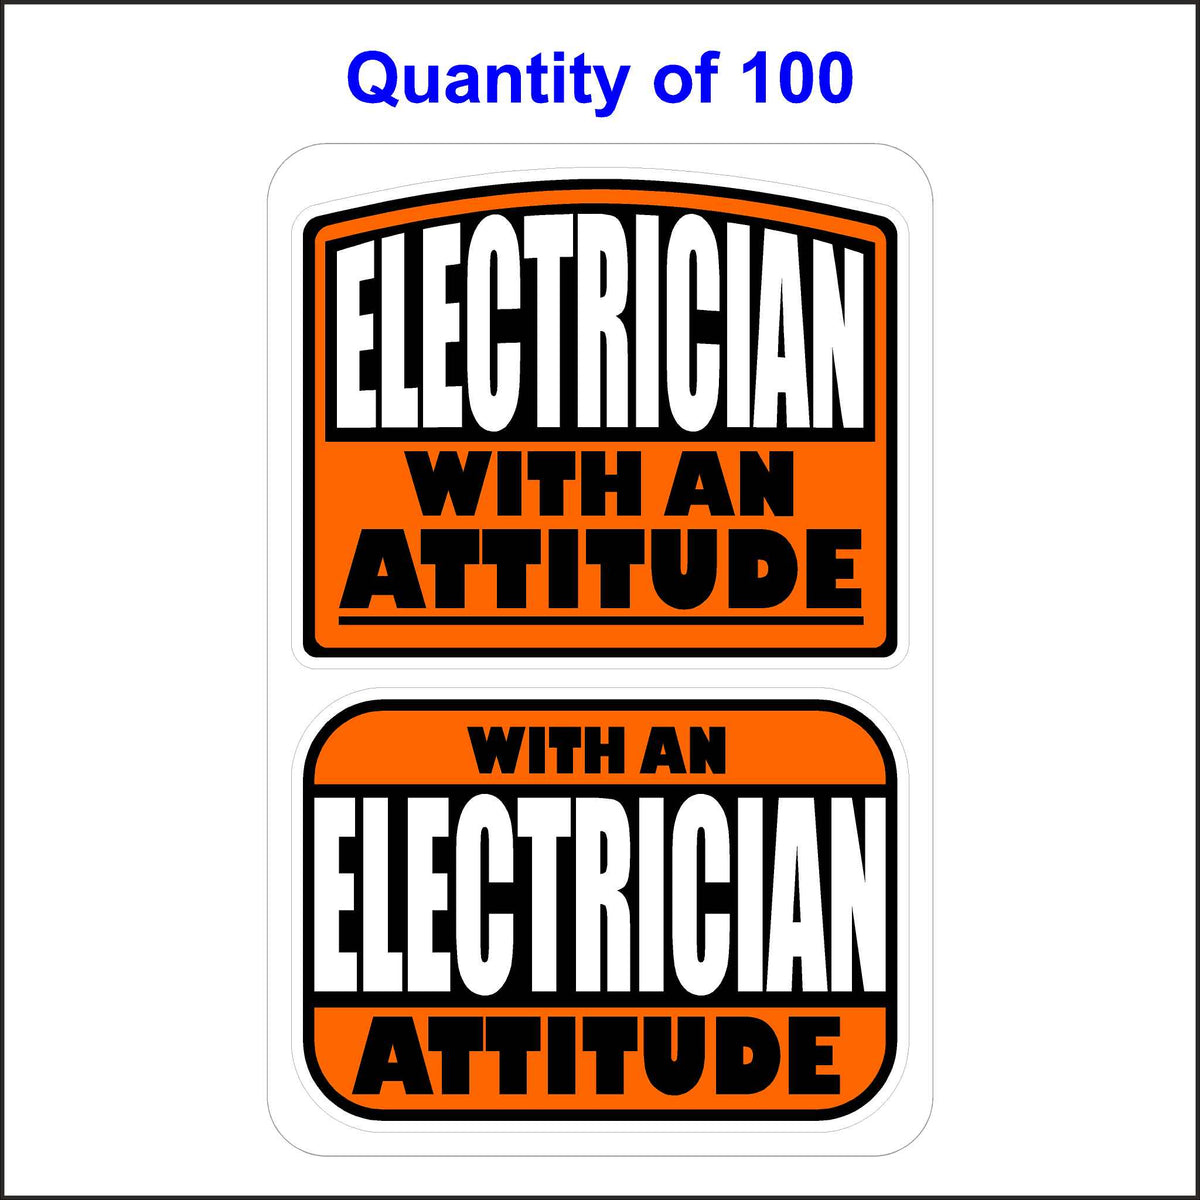 Electrician With An Attitude Stickers 100 Quantity.